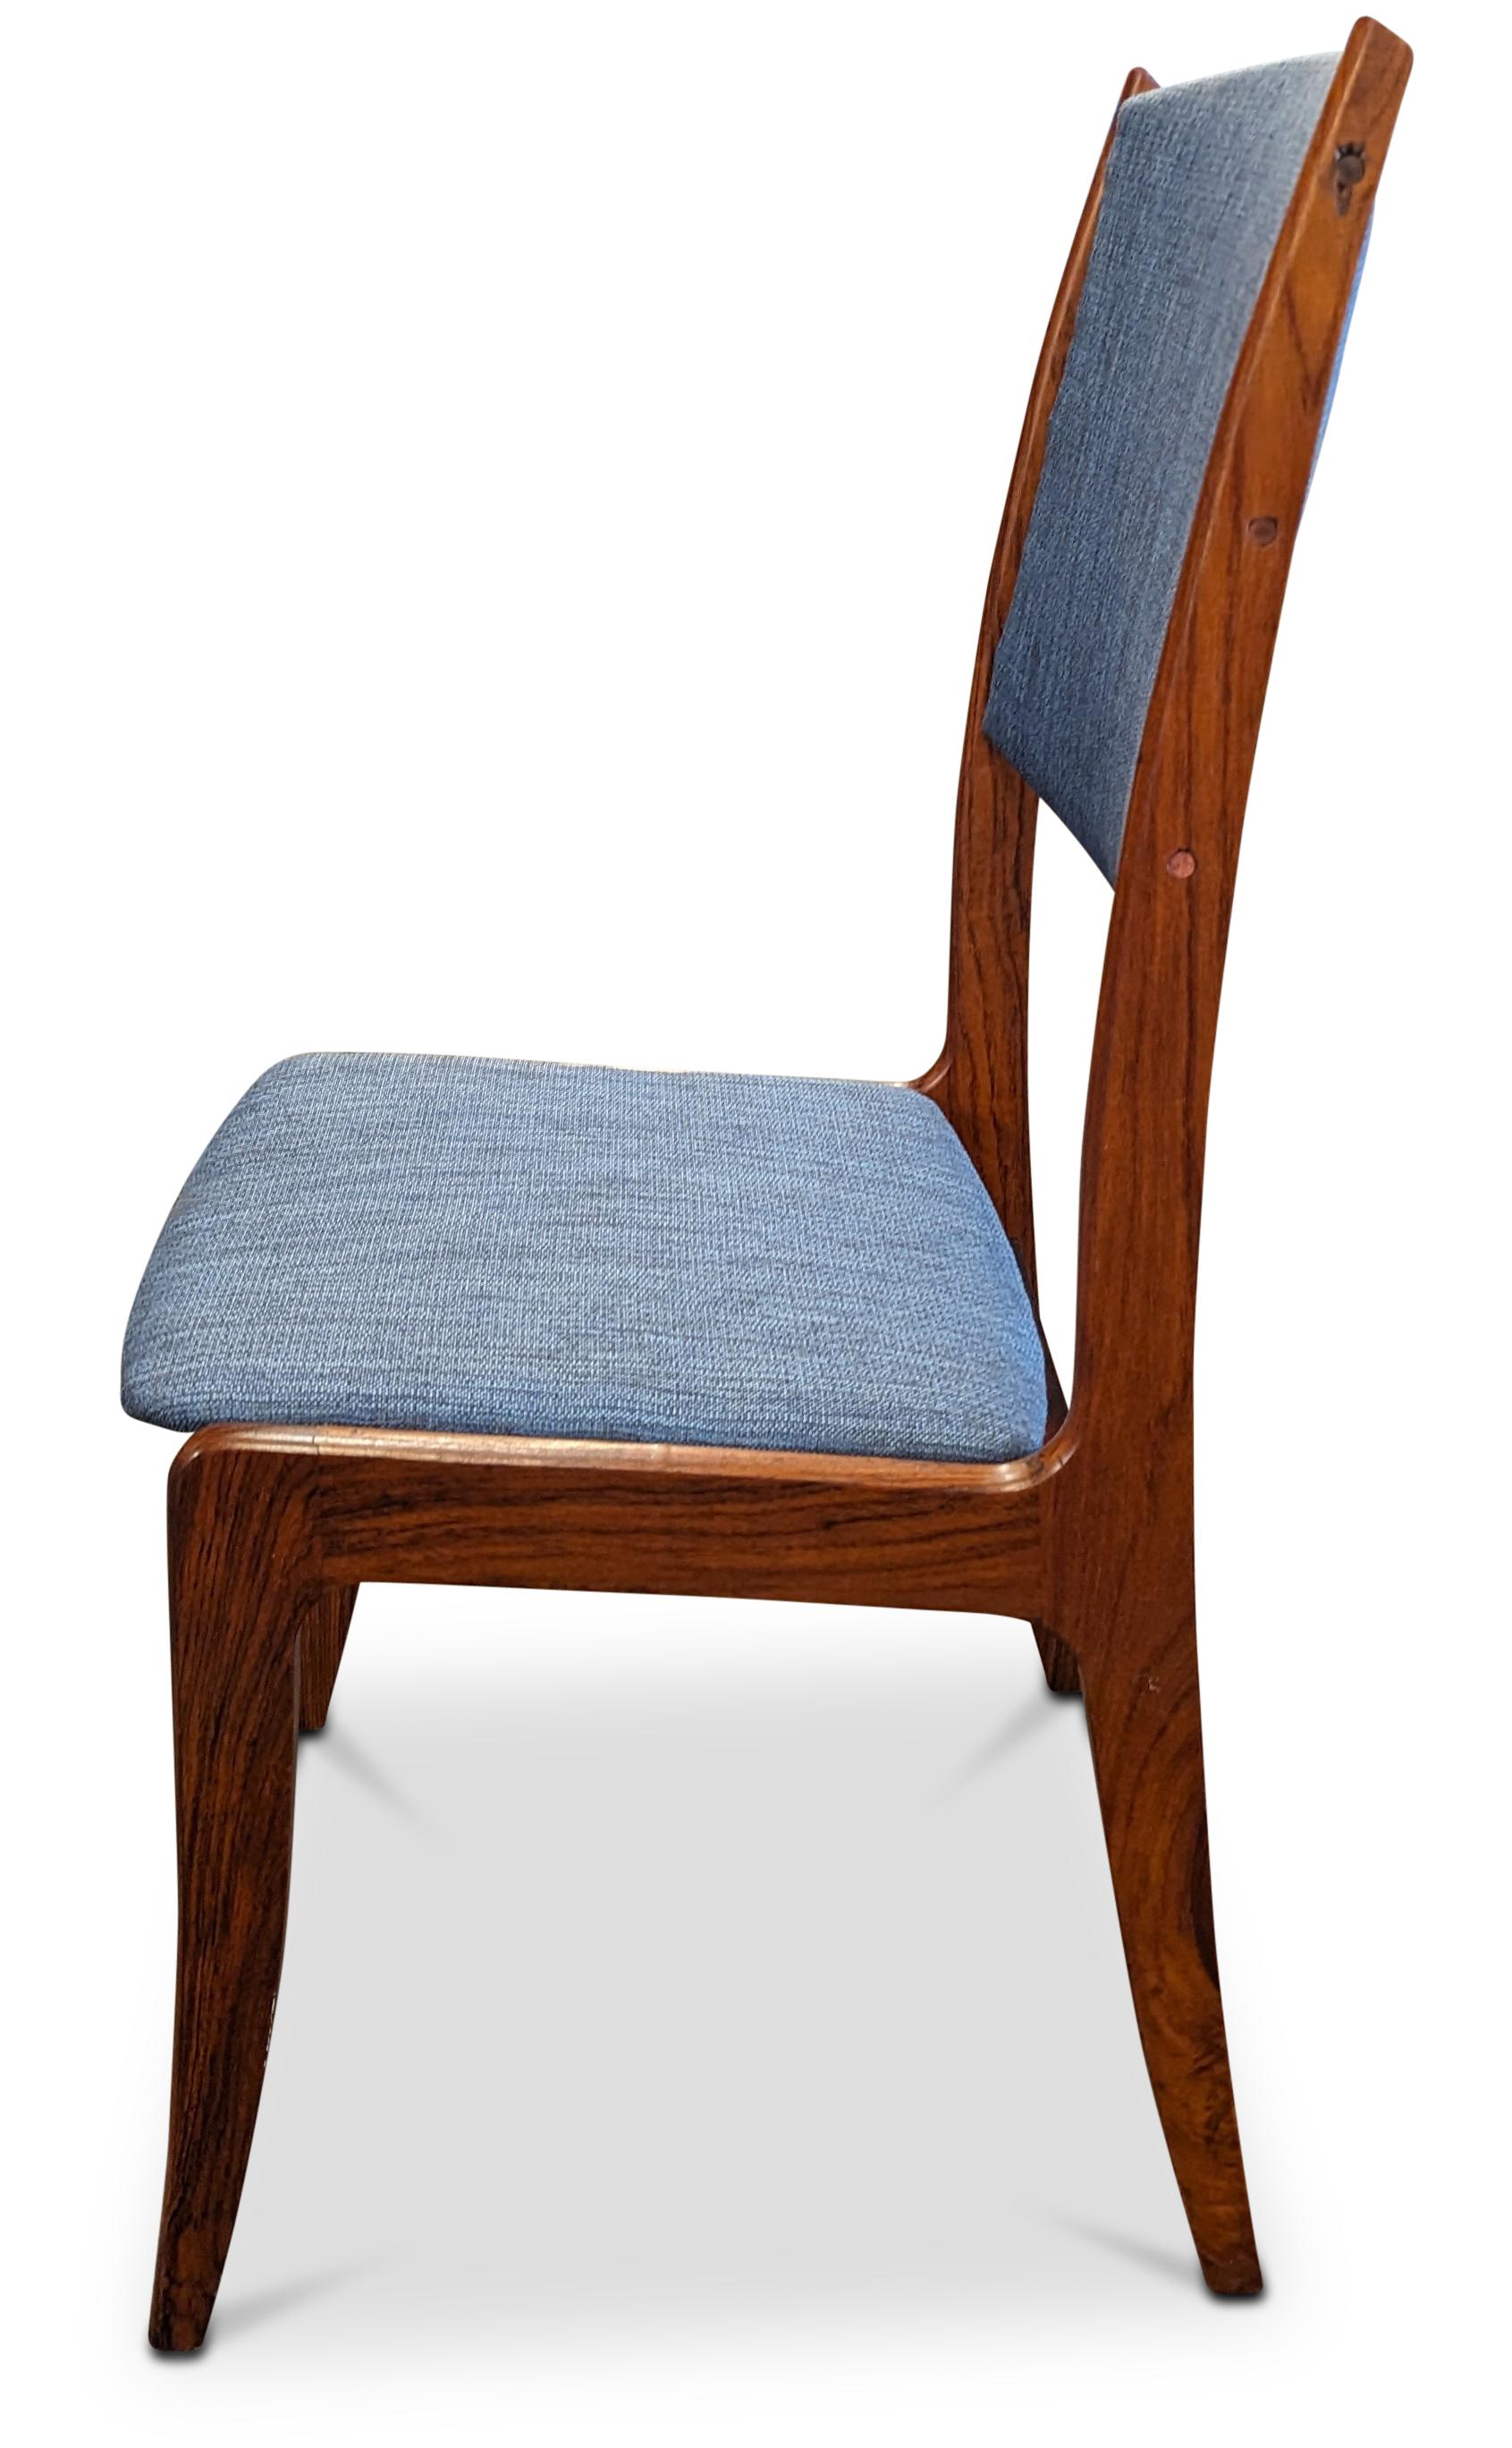 Mid-20th Century Vintage Danish Mid Century Skovby Tall Back Rosewood Dining Chairs - 072341